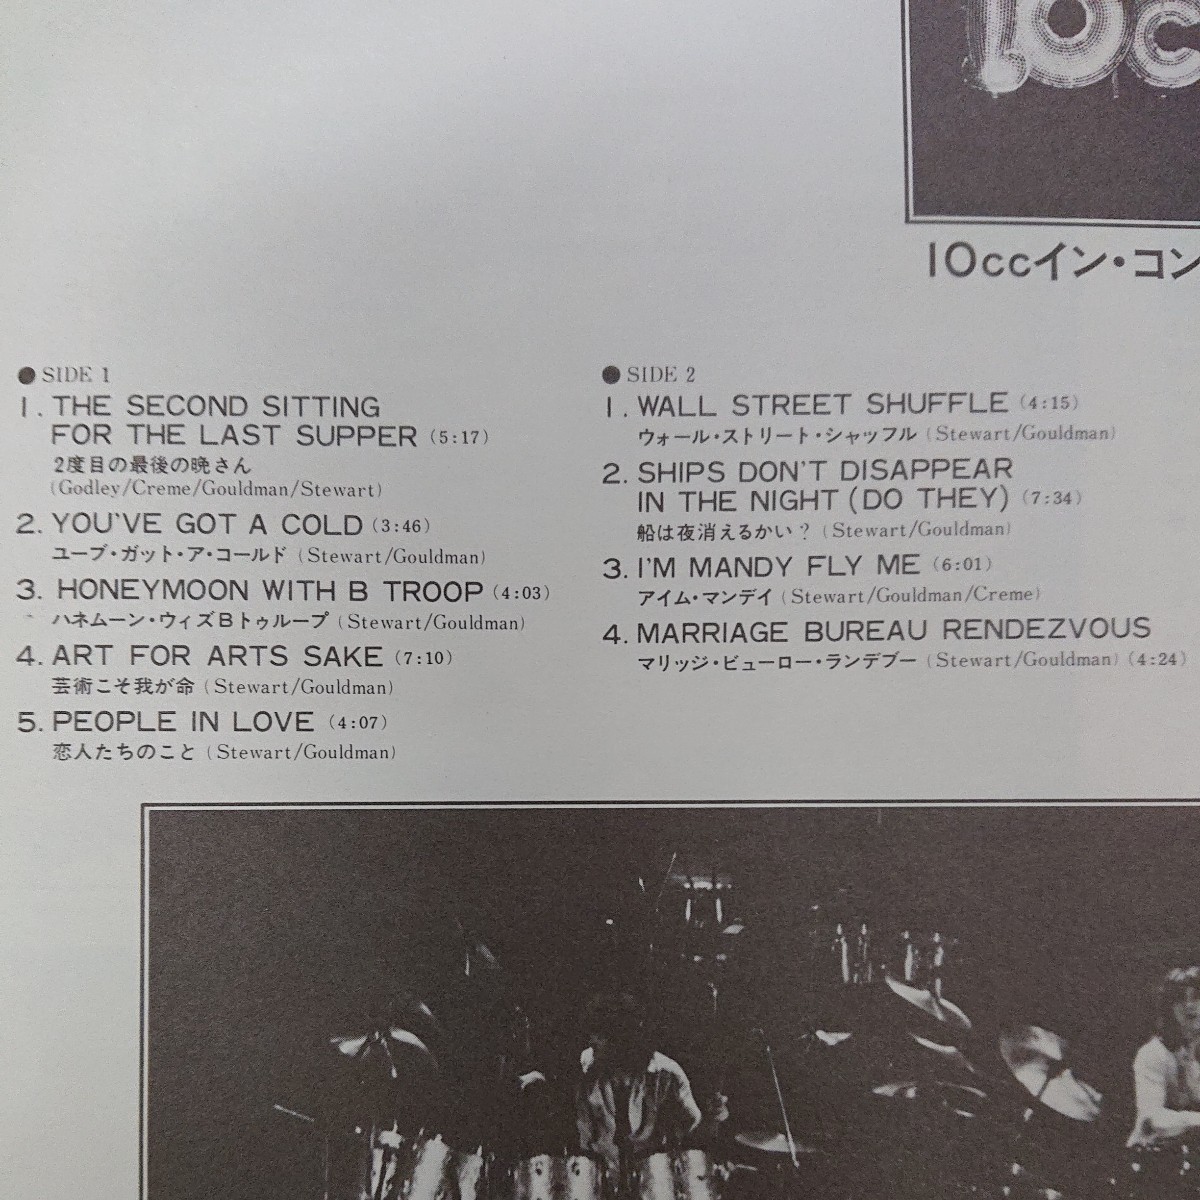 LP/10cc〈LIVE AND LET LIVE〉☆5点以上まとめて（送料0円）無料☆_画像4